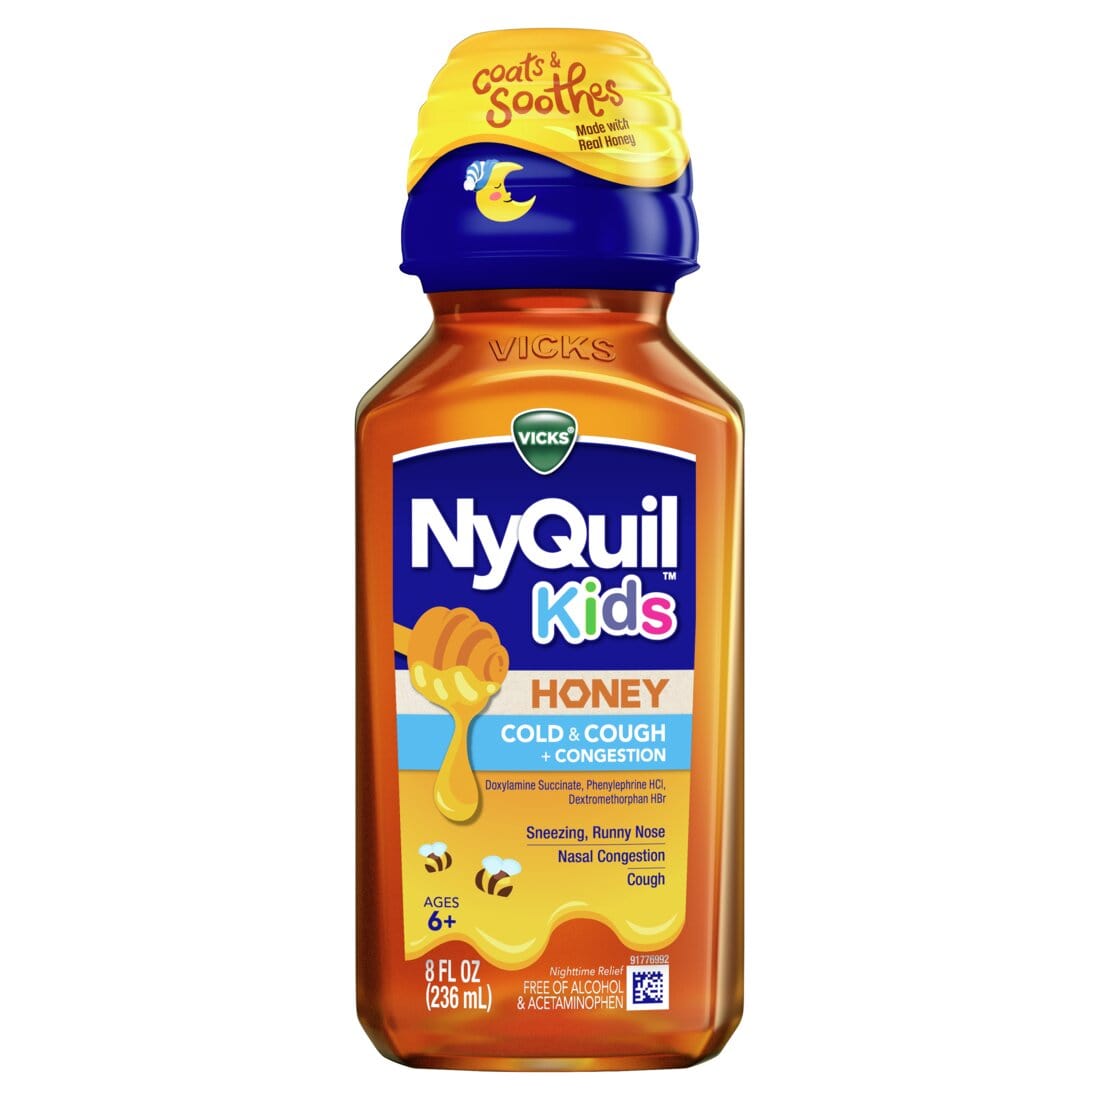 Vicks Kids NyQuil Honey Cold & Cough + Congestion Relief Honey Flavor For Children (Ages 6+) - 8oz/12pk